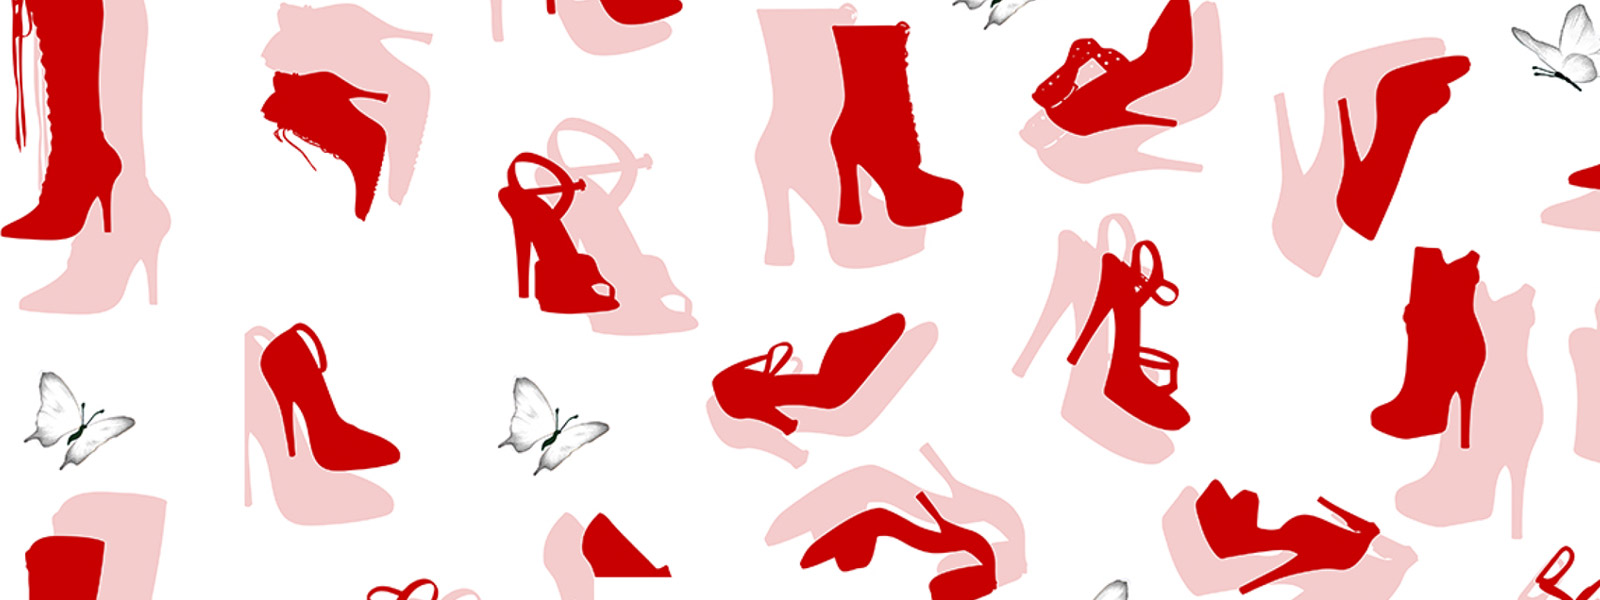 Red Shoes: Against Violence on Women | Costa Crociere Foundation